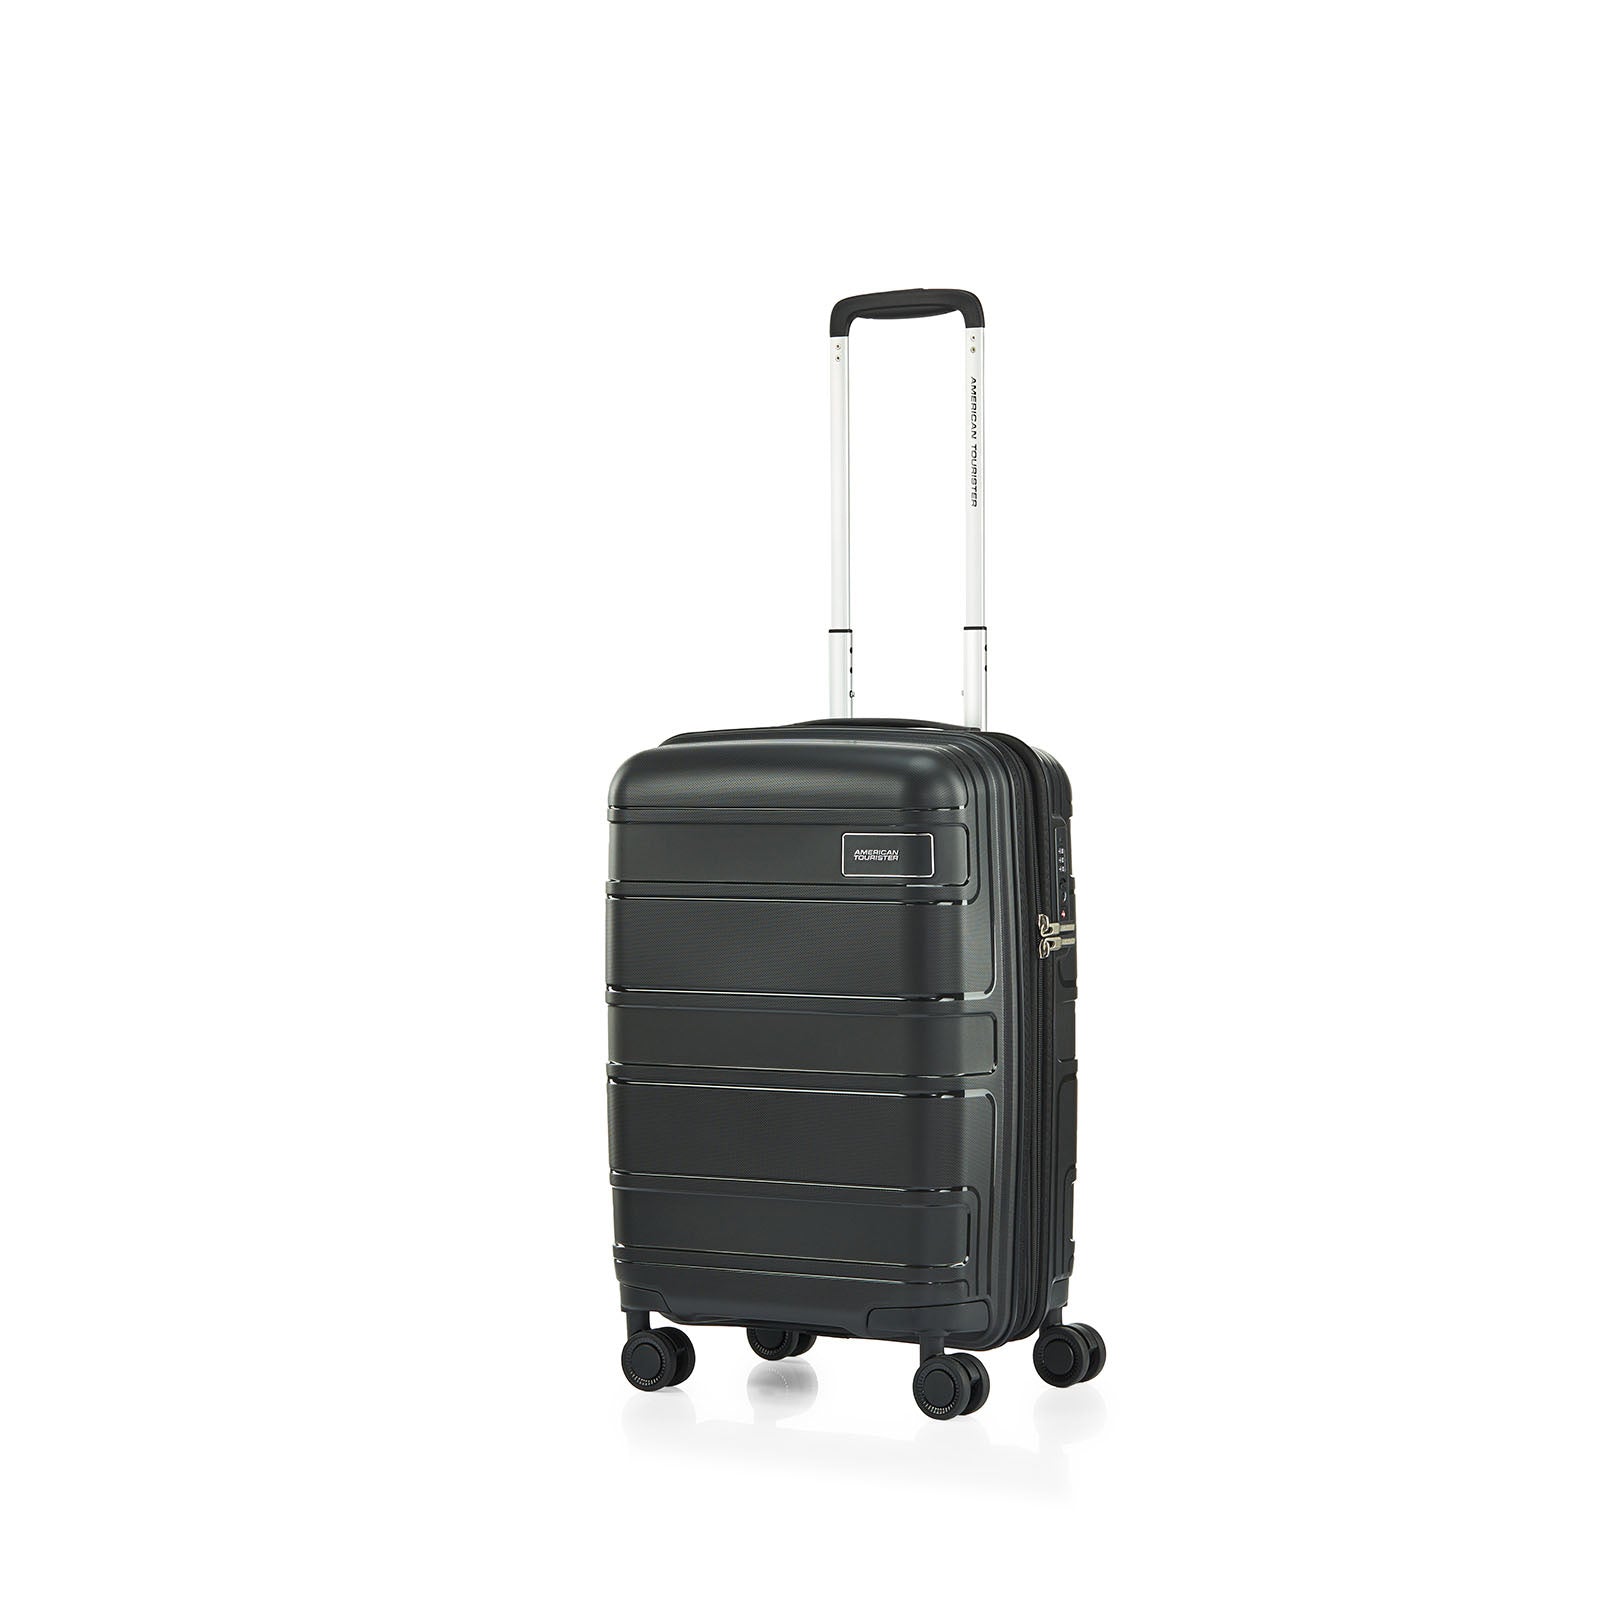 American-Tourister-Light-Max-55cm-Carry-On-Suitcase-Black-Front-Angle